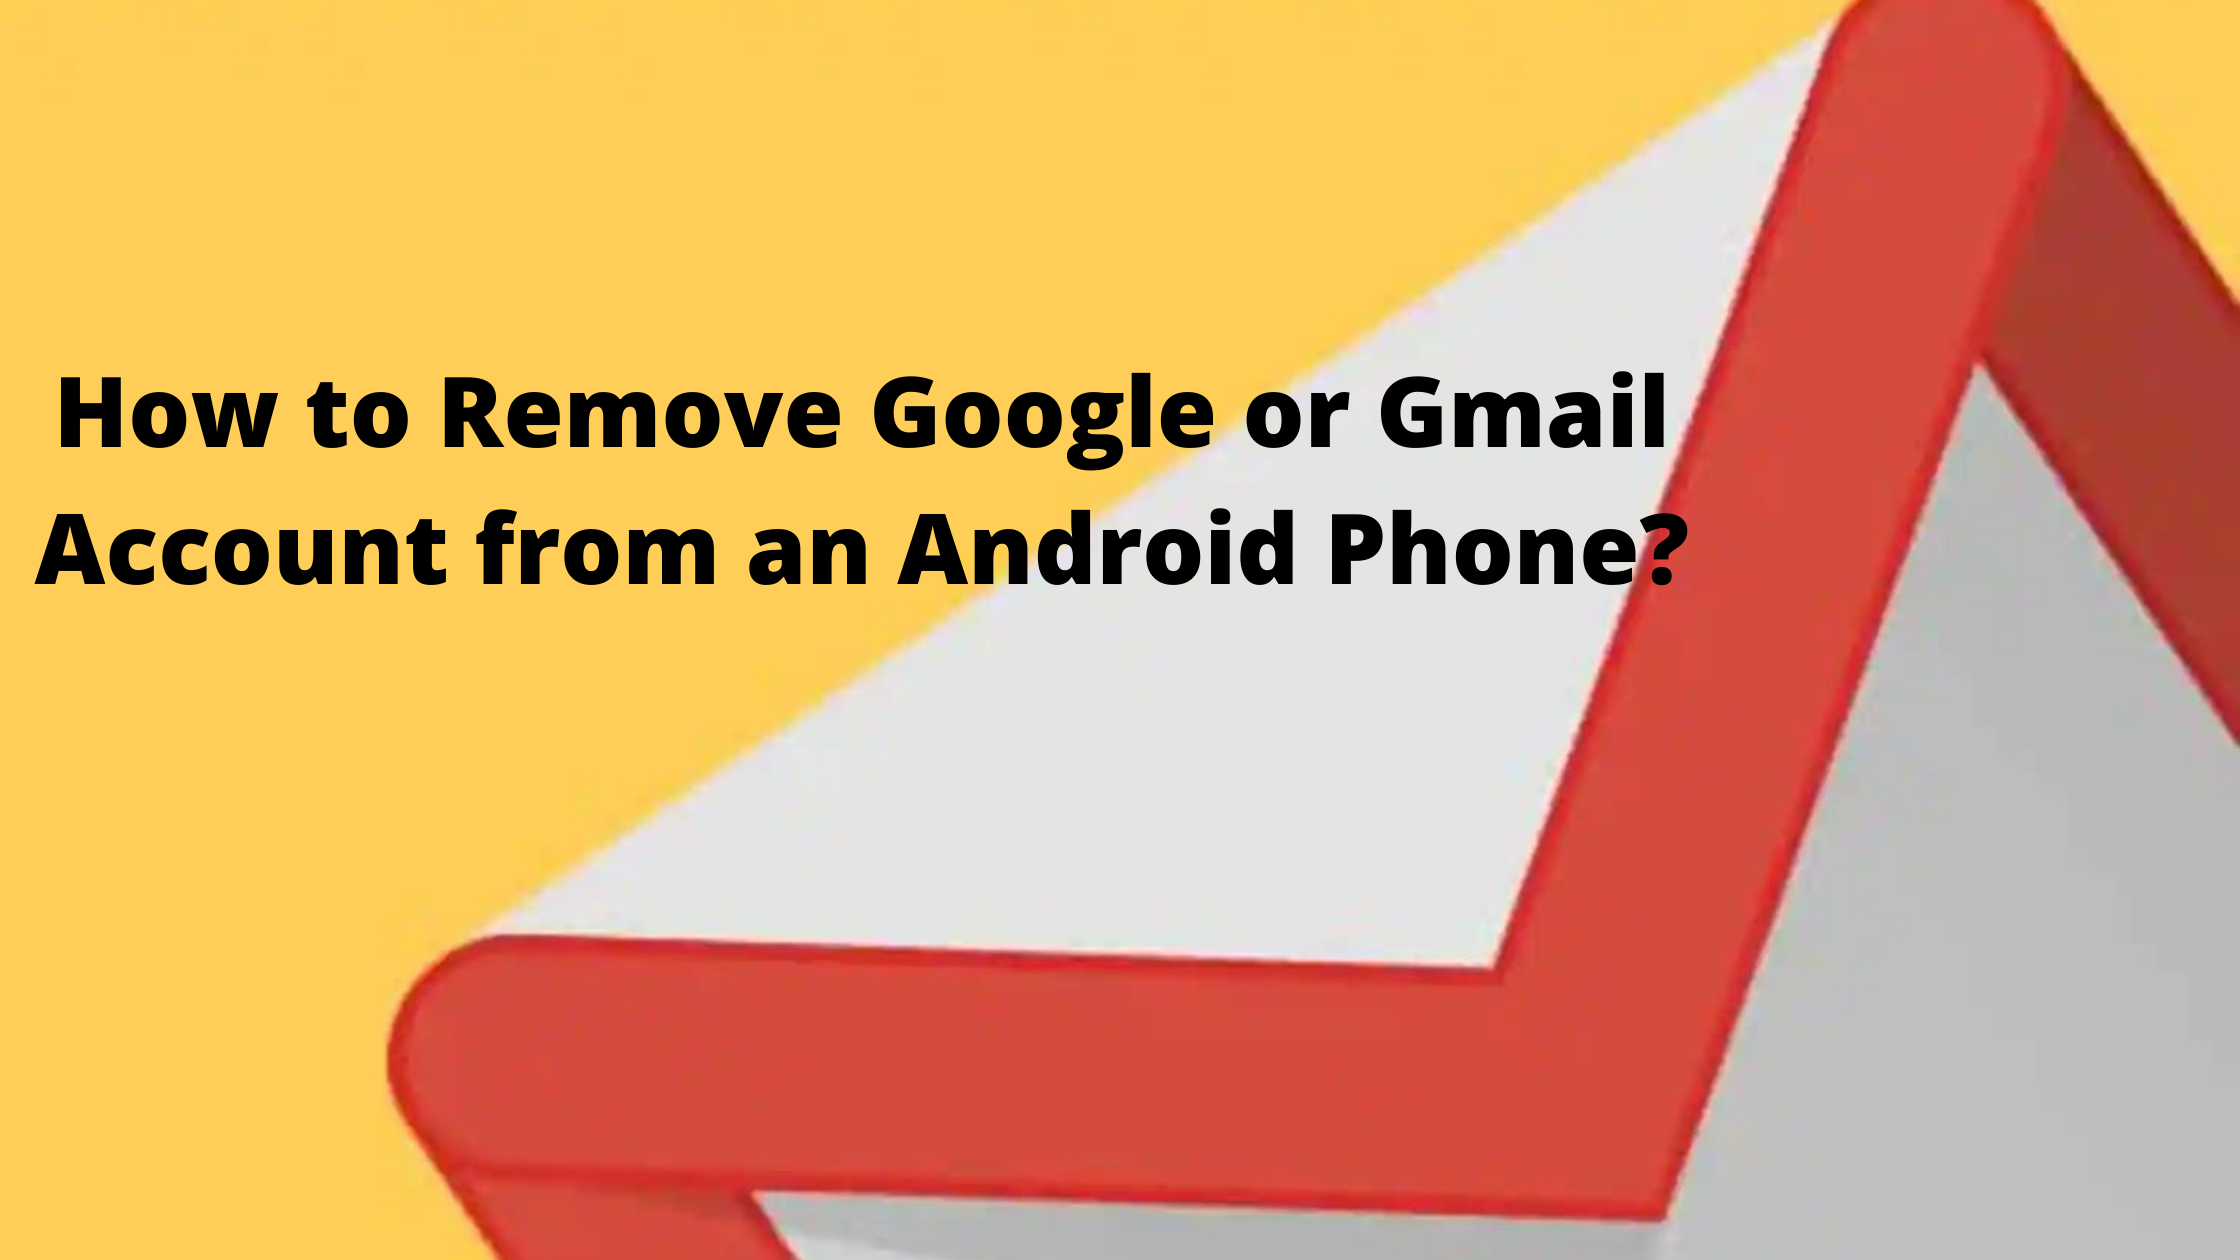 How to Remove Google or Gmail Account from an Android Phone?